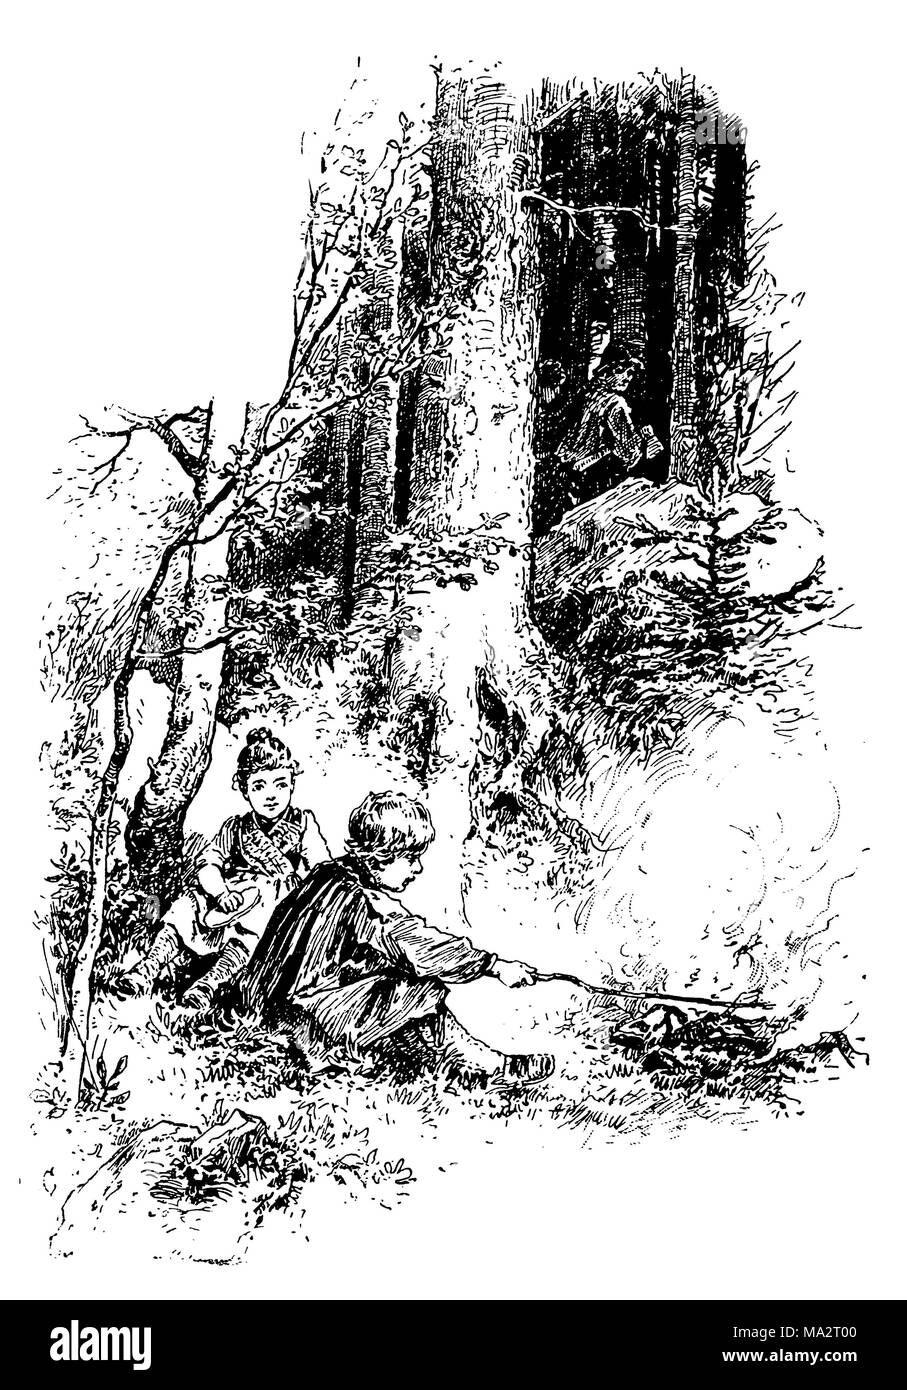 Hansel and Gretel alone in the woods Stock Photo